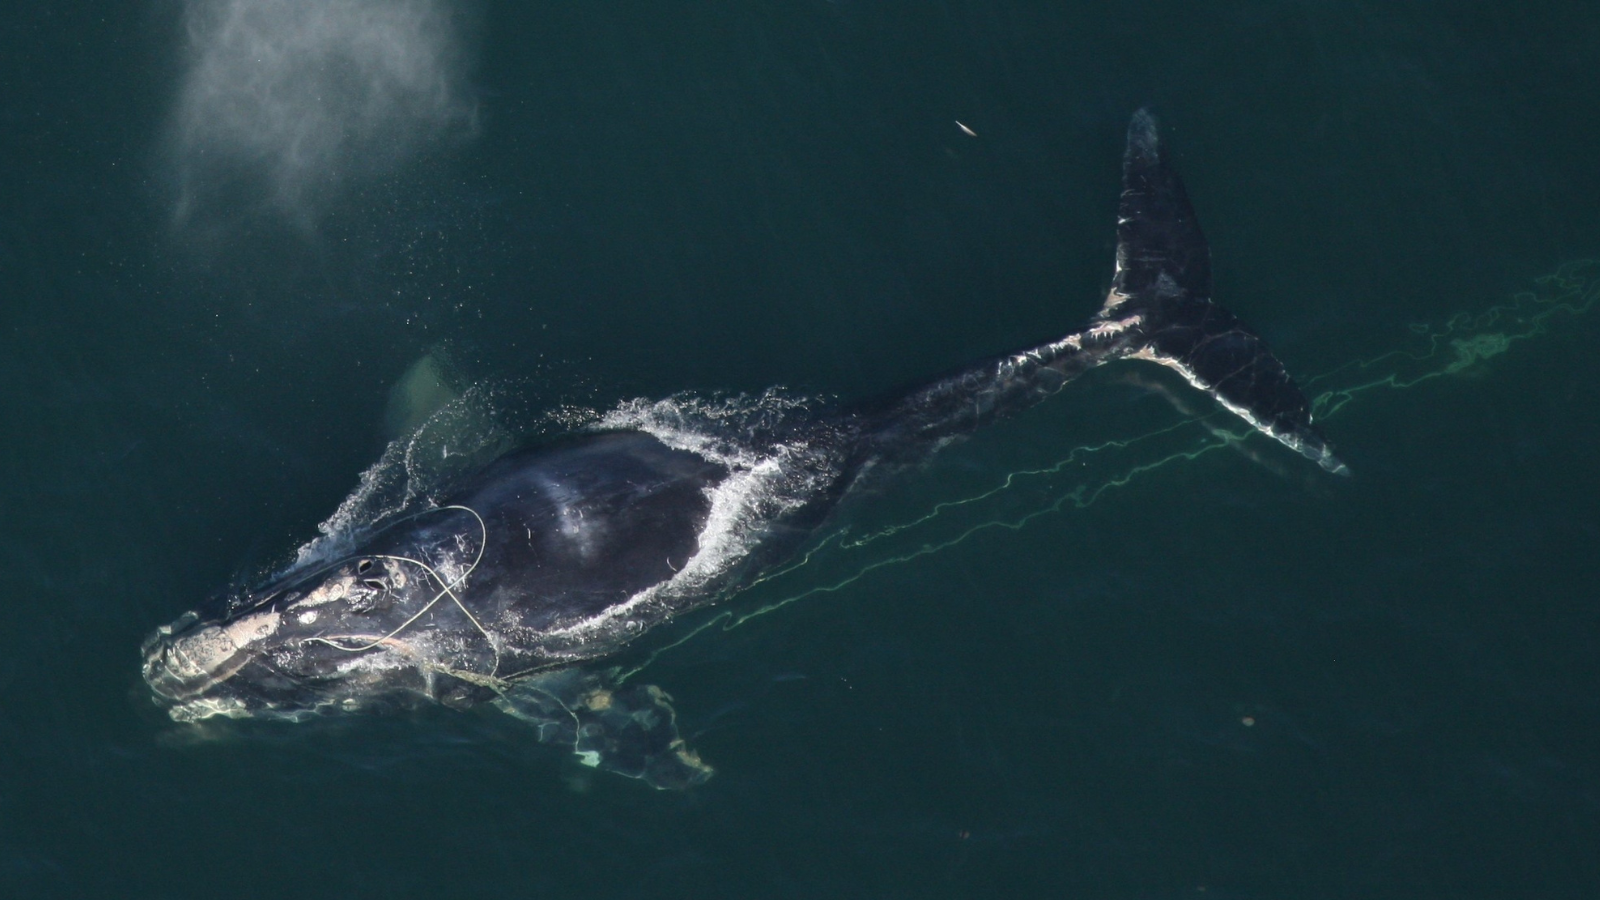 Right whale entangled in fishing gear